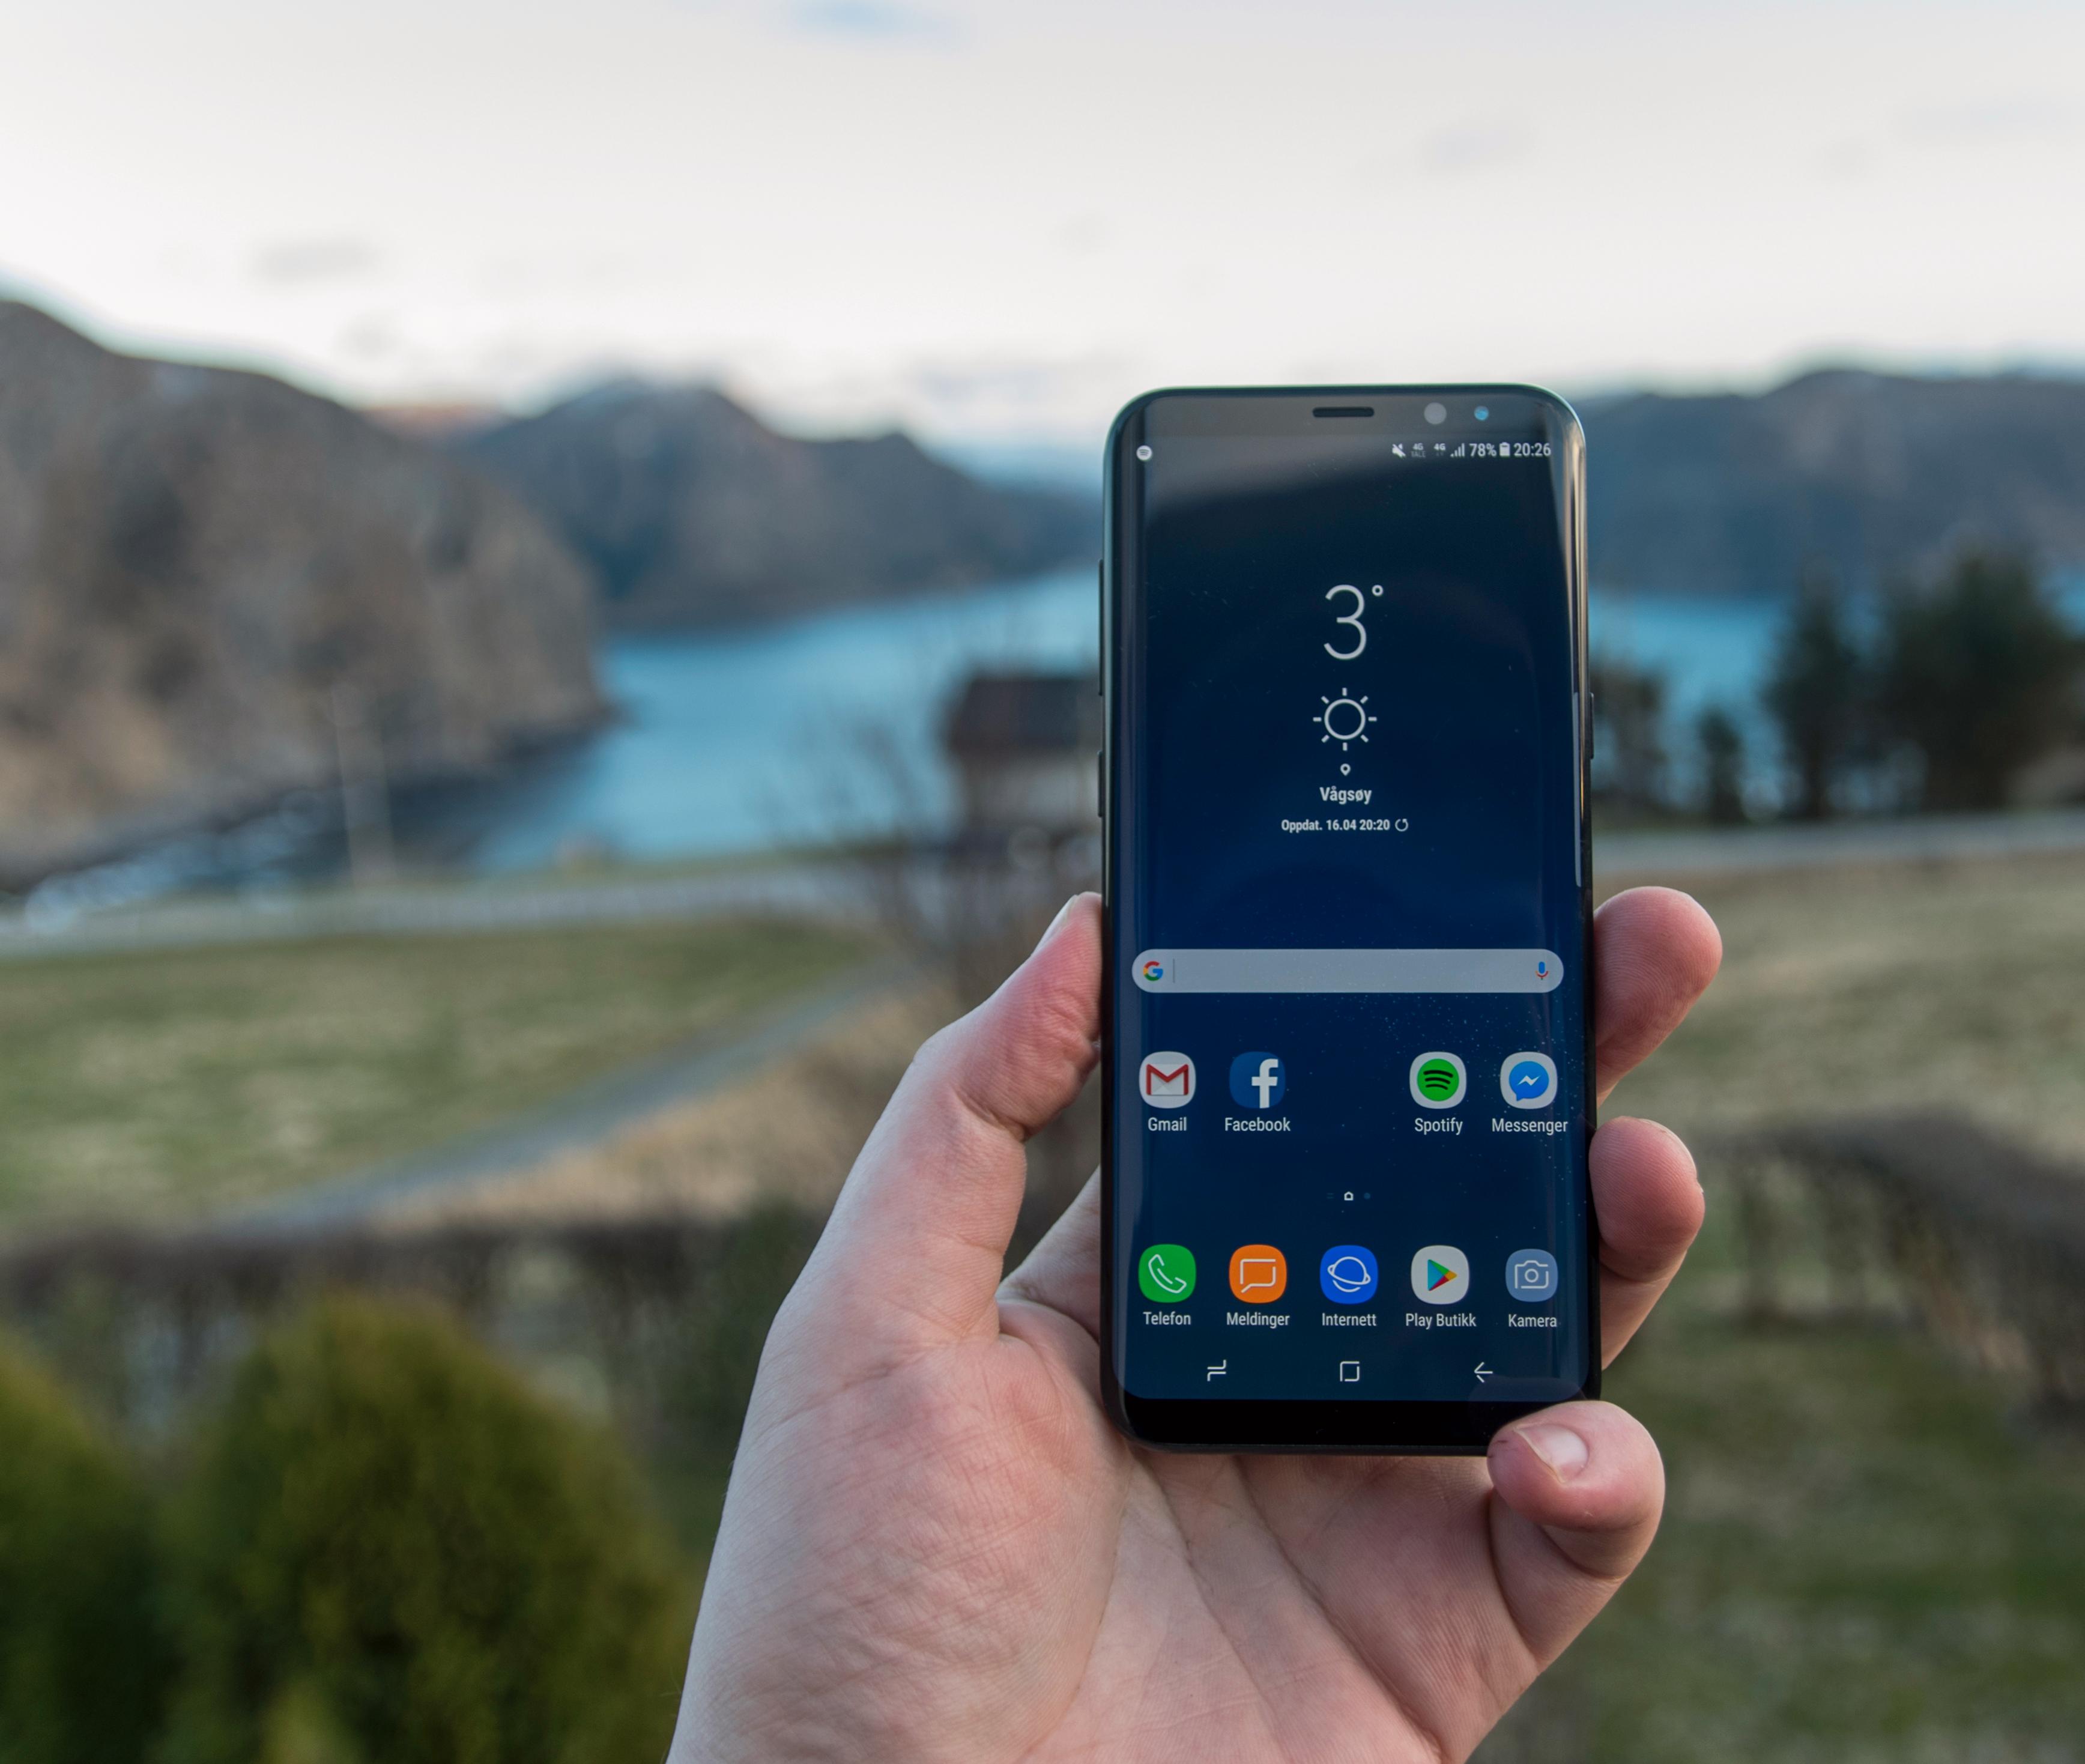 Samsung Galaxy S8+, from our 2017 mobile phone test.